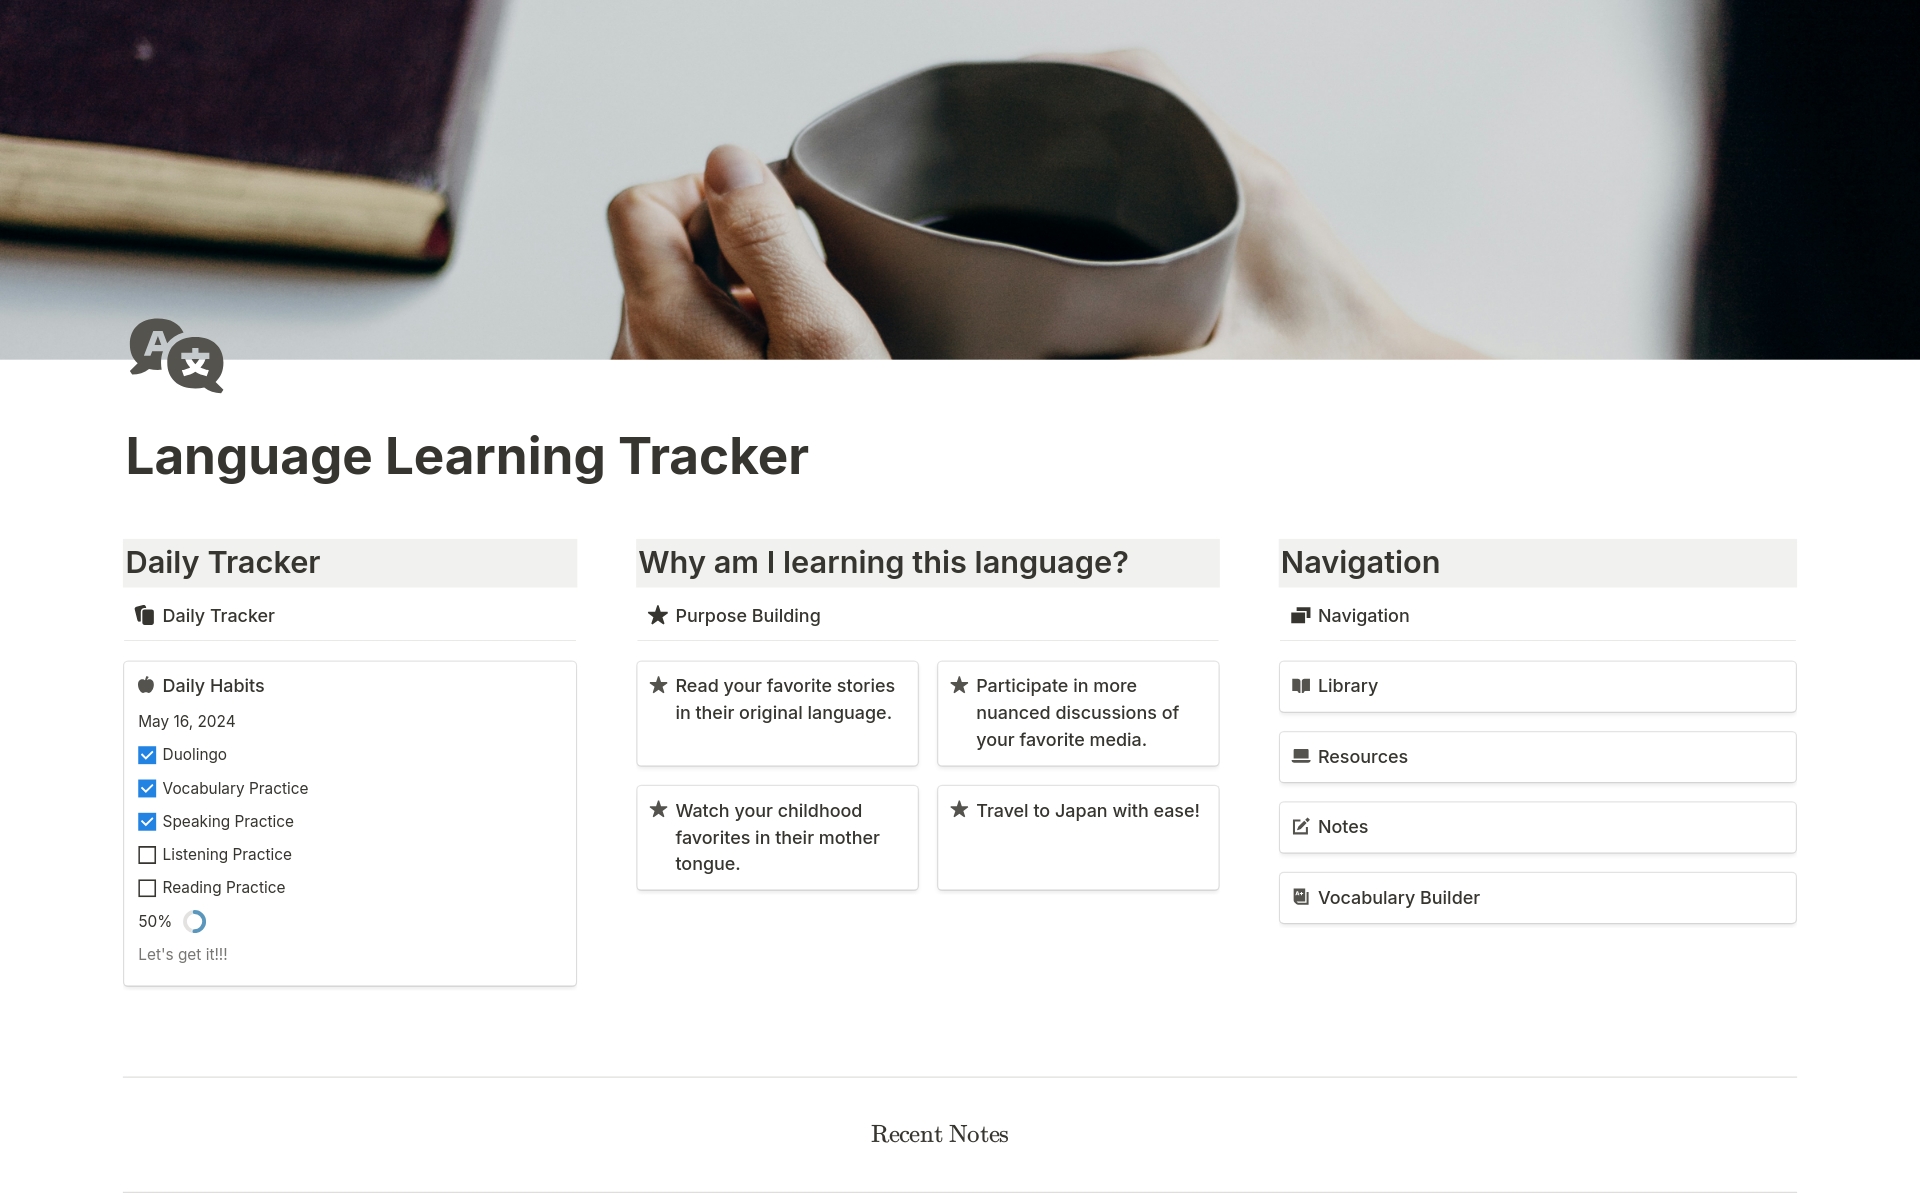 Track your language learning progress and organize study materials for effective linguistic learning.